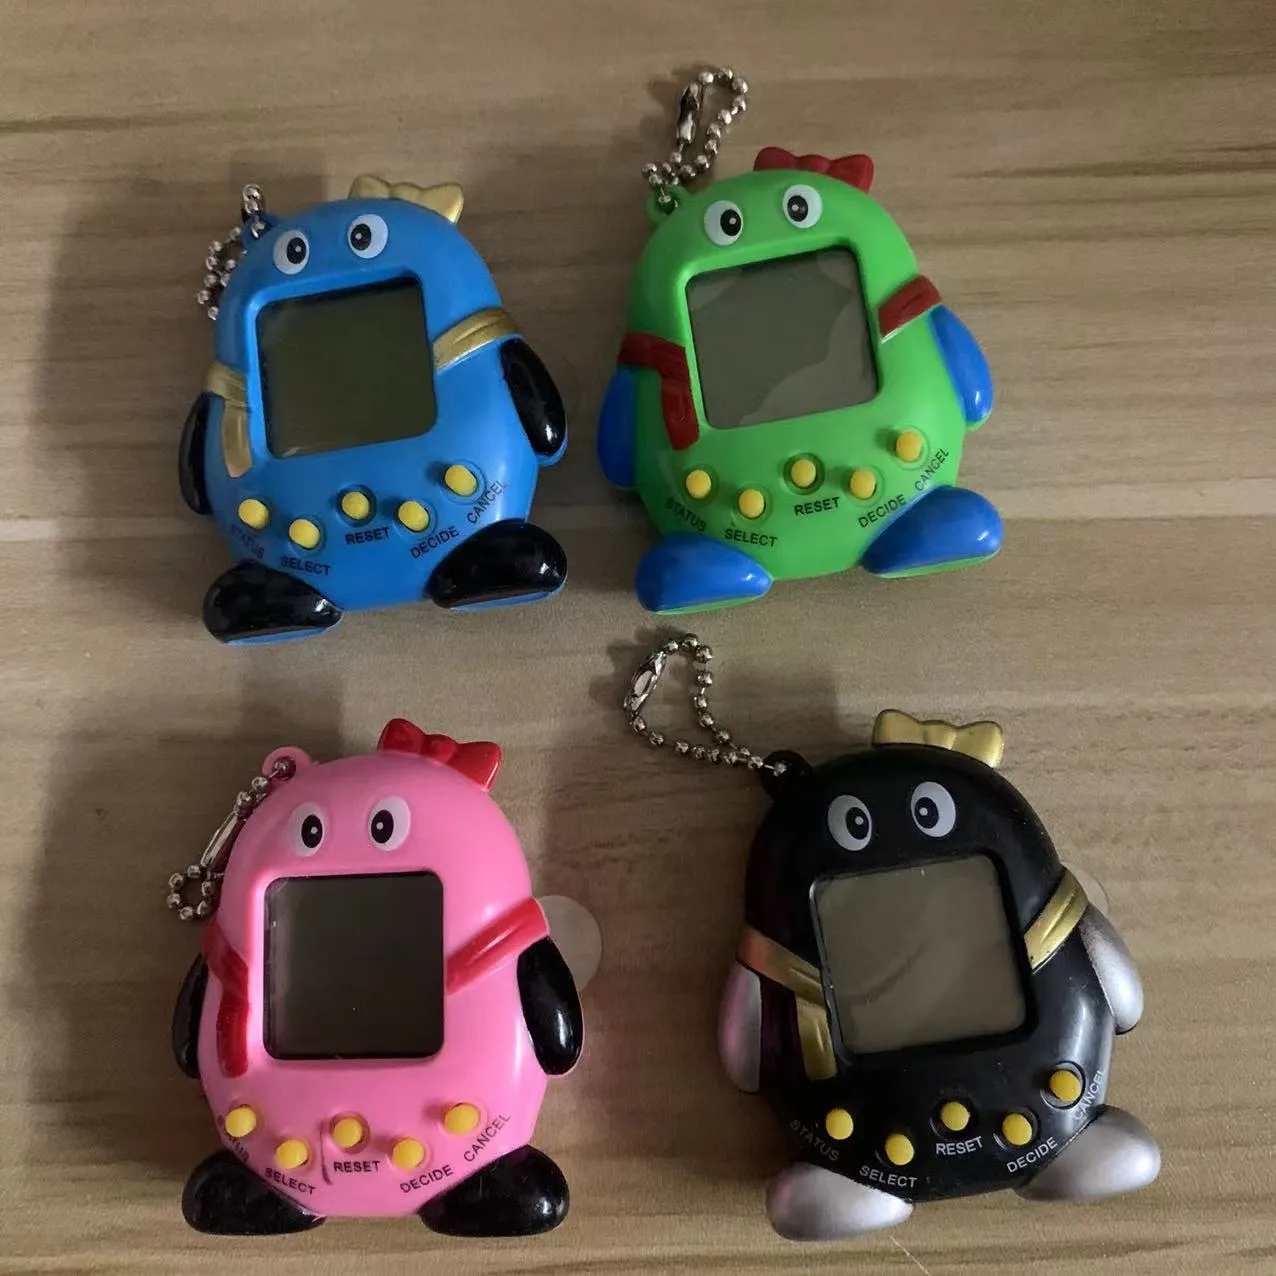 Electronic Pet Toys Retro Game Toys Pets Funny Toys Vintage Virtual Pet Cyber Toy Digital Pet For Child Kids Games